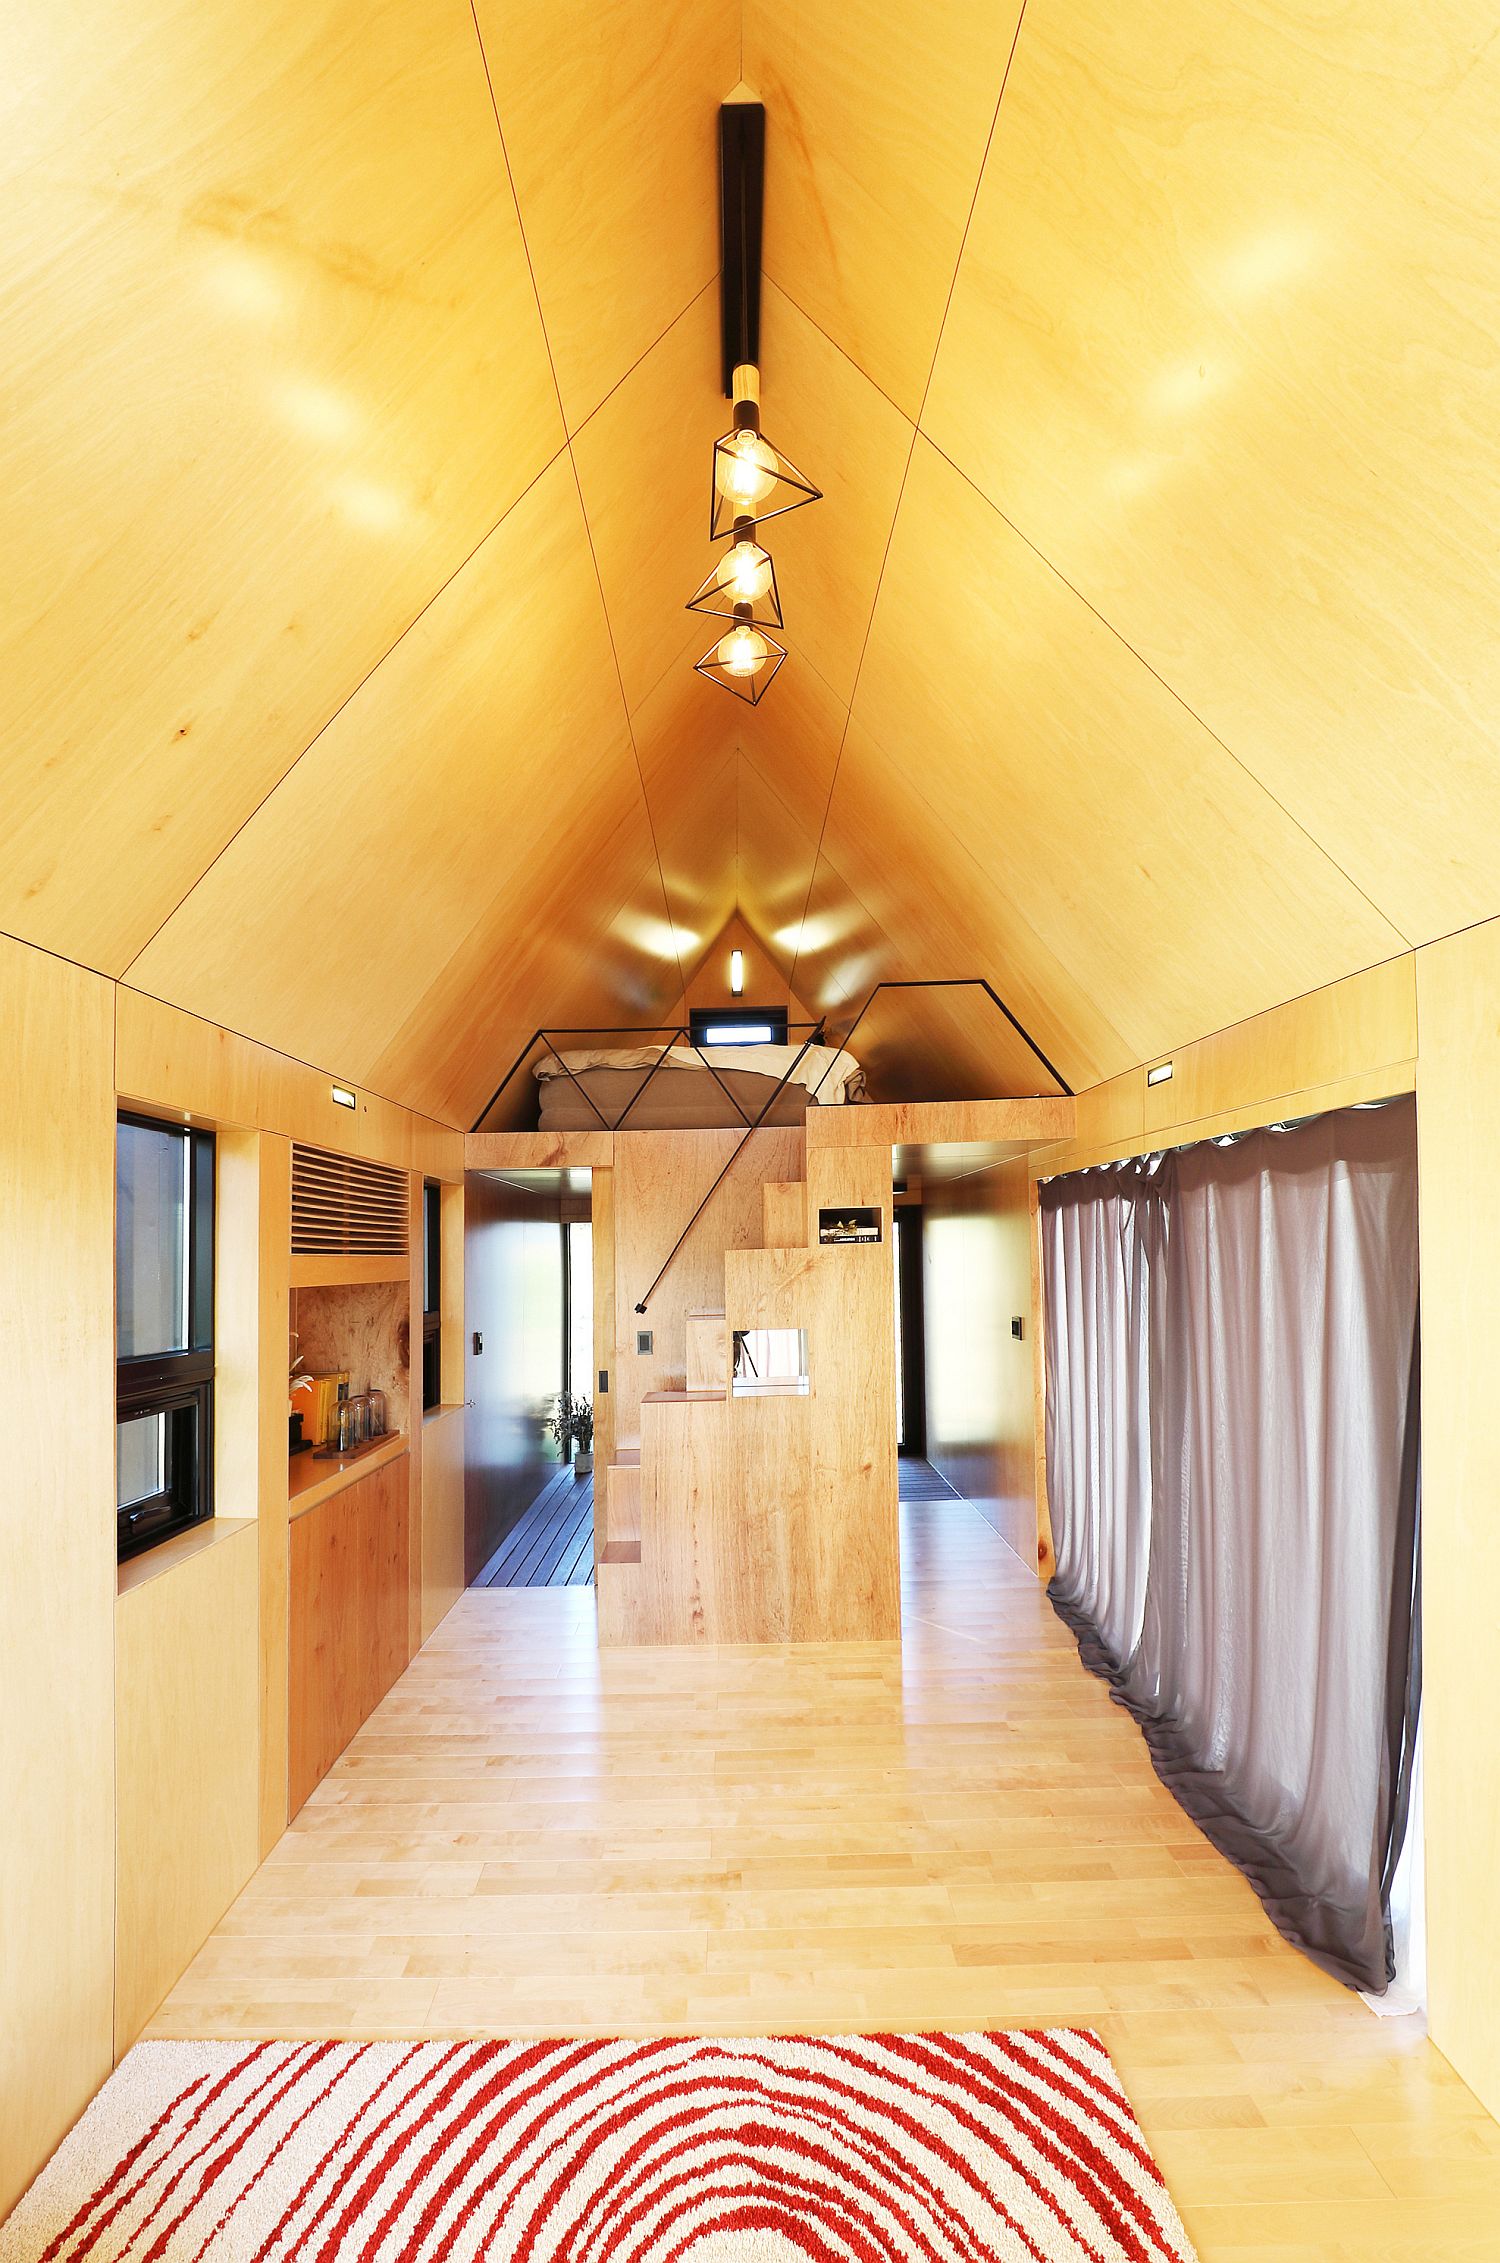 Lighting-the-tiny-wooden-cabin-interior-in-style